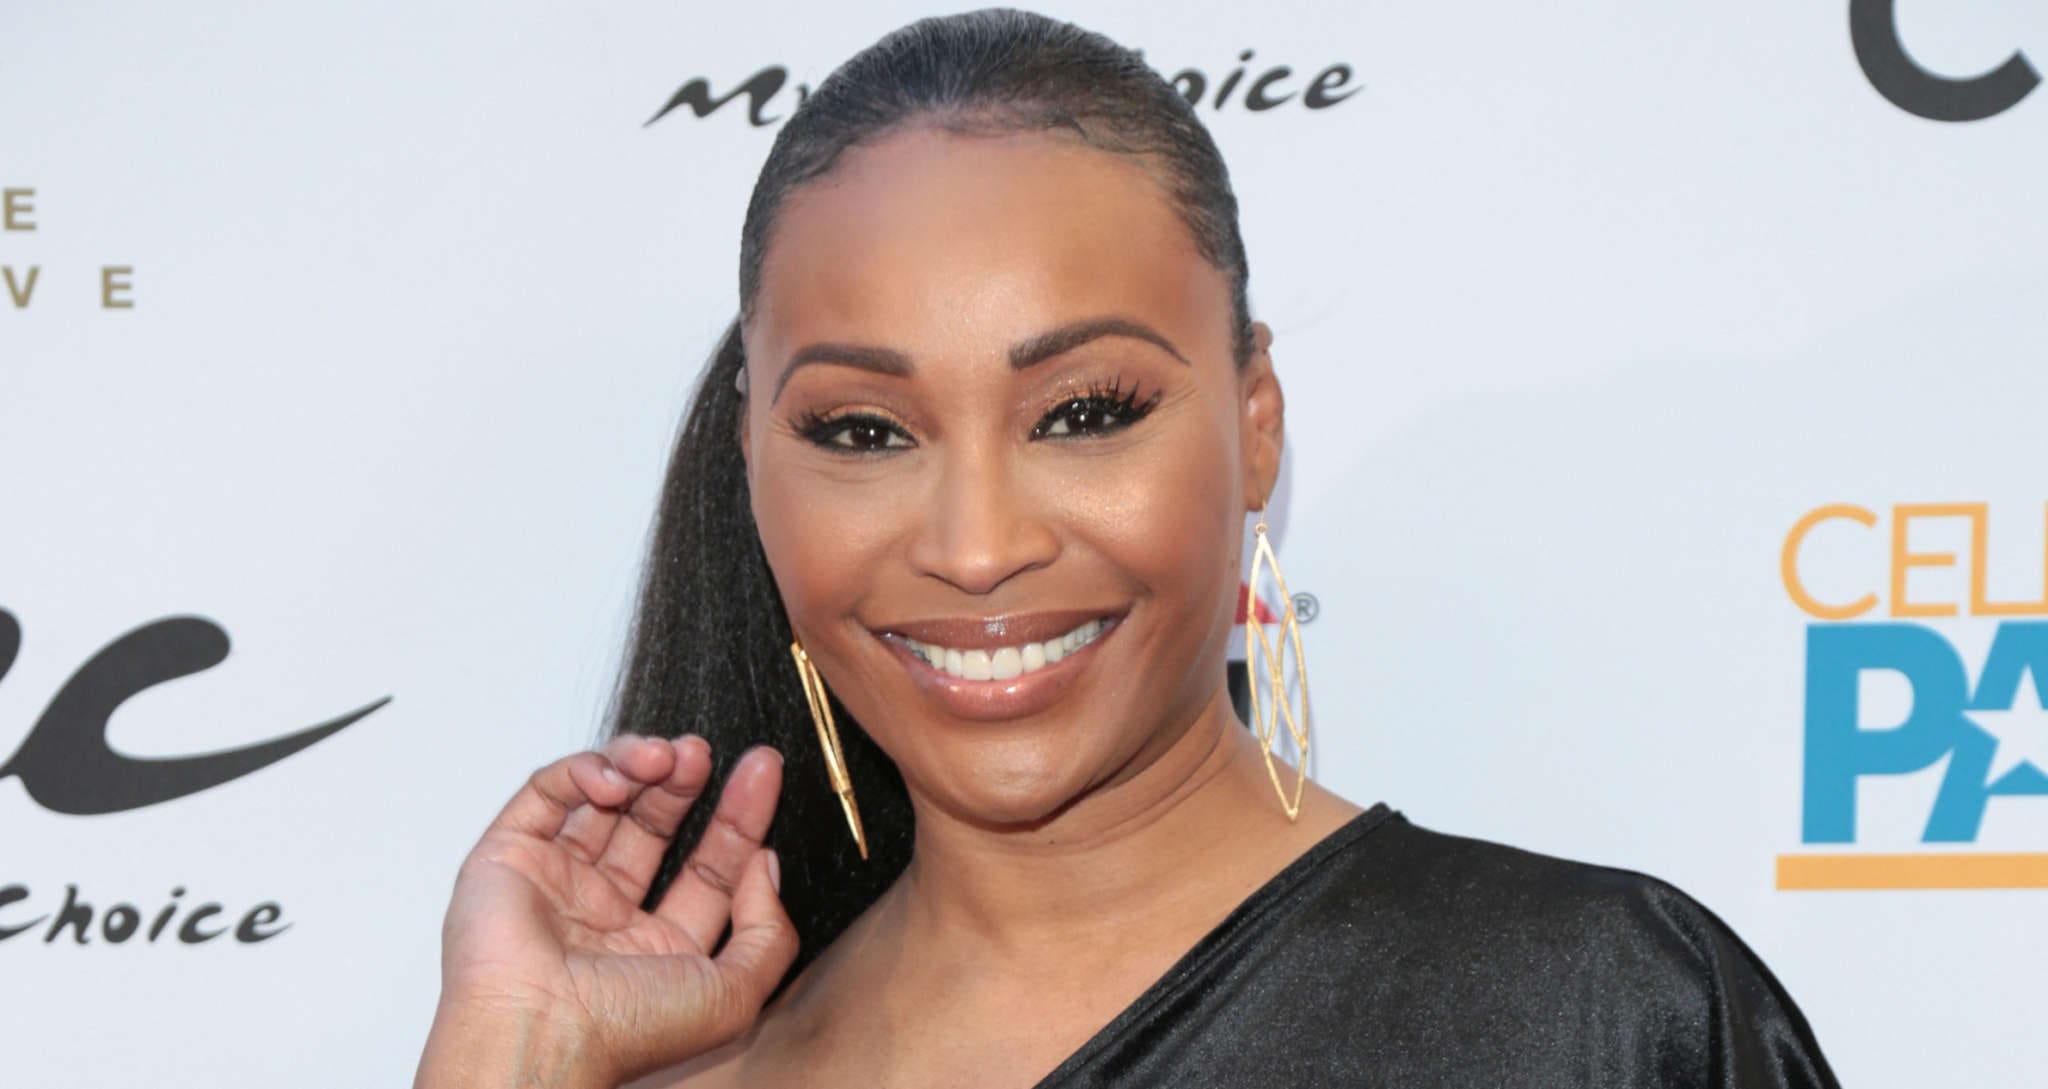 Cynthia Bailey Shares Pics With Her RHOA Personal Photographer - Find Out Why Fans Throw Shade